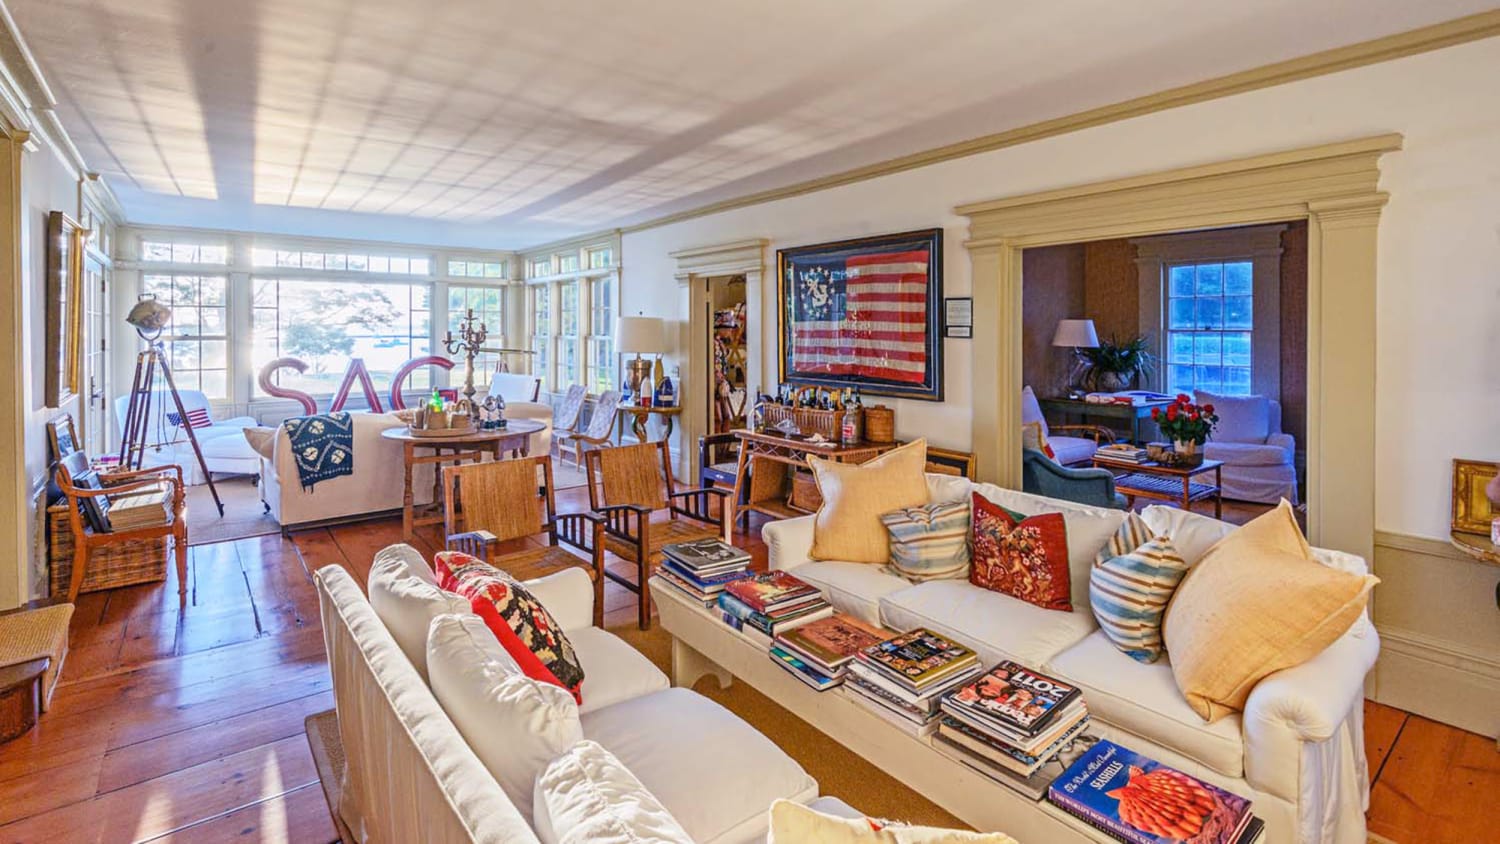 Another day, another home! Christie Brinkley selling second Hamptons house